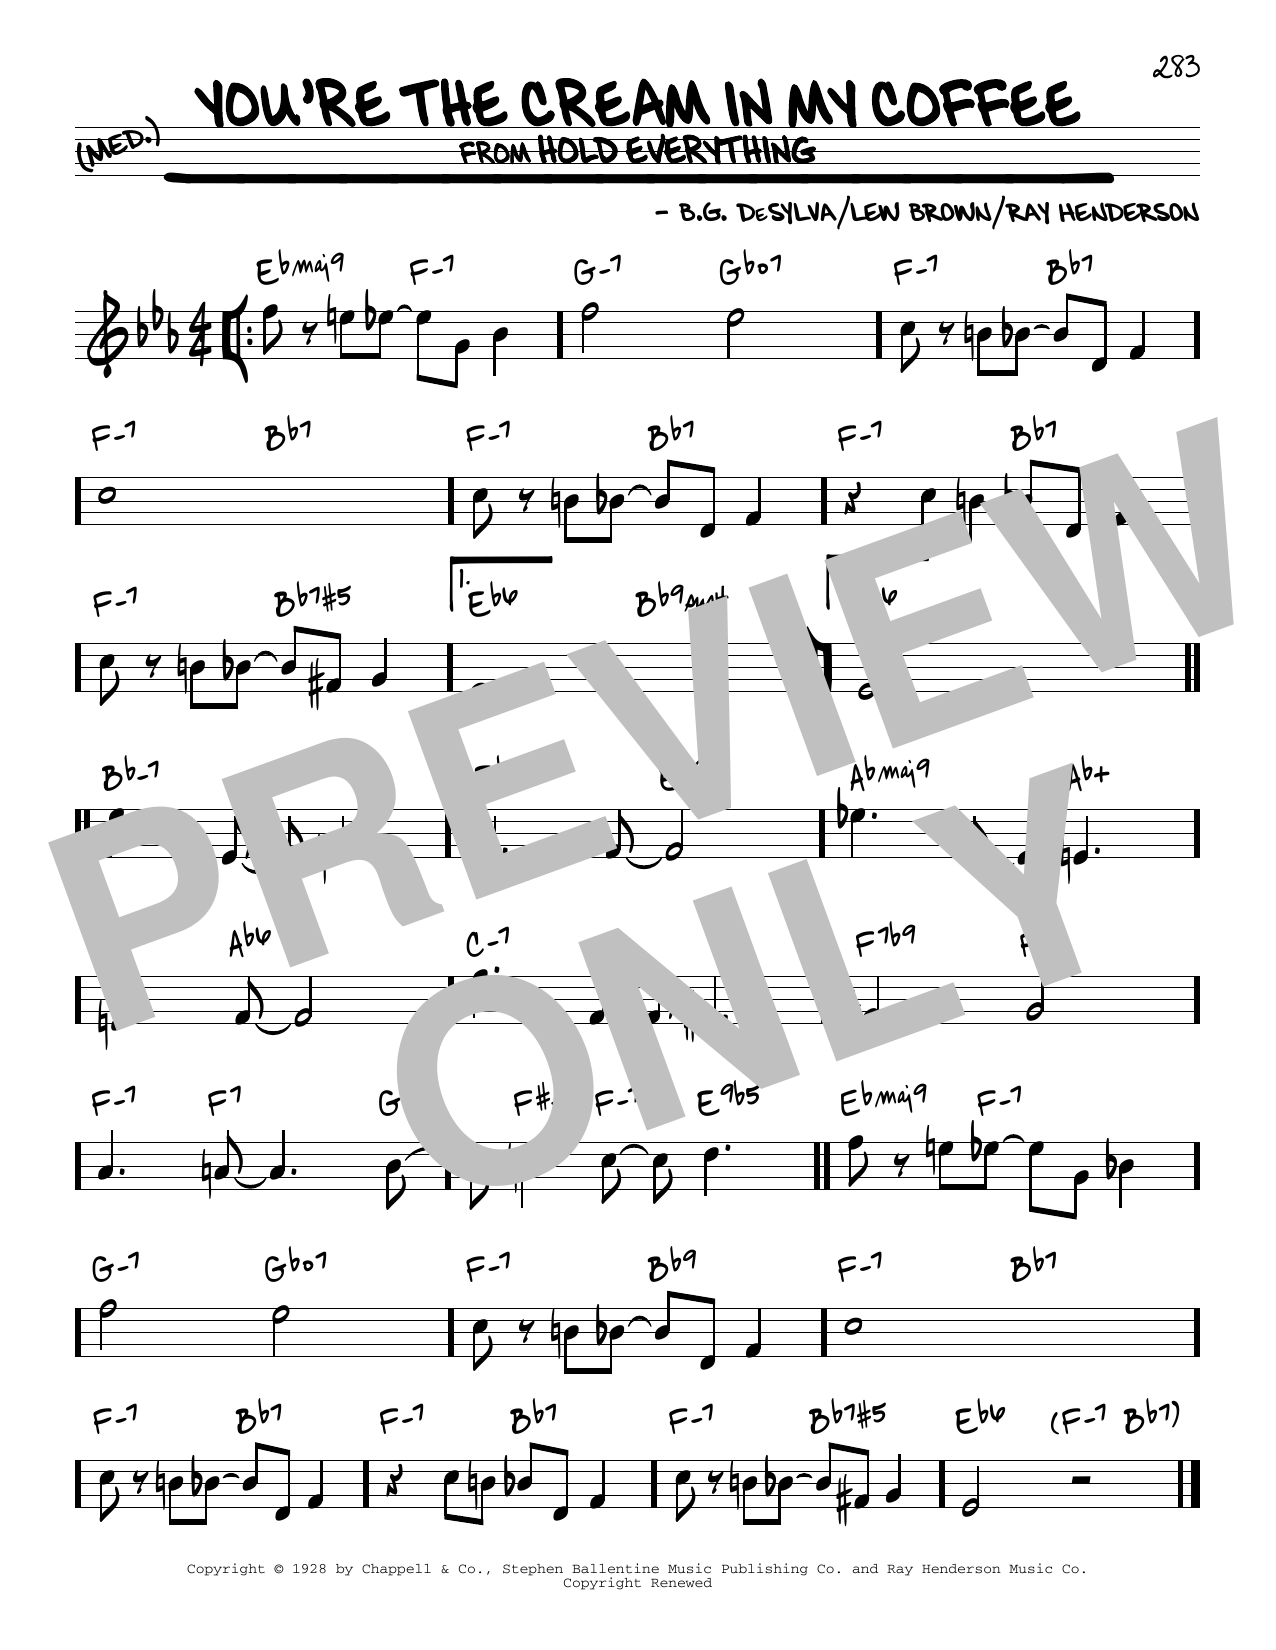 Download Ray Henderson You're The Cream In My Coffee Sheet Music